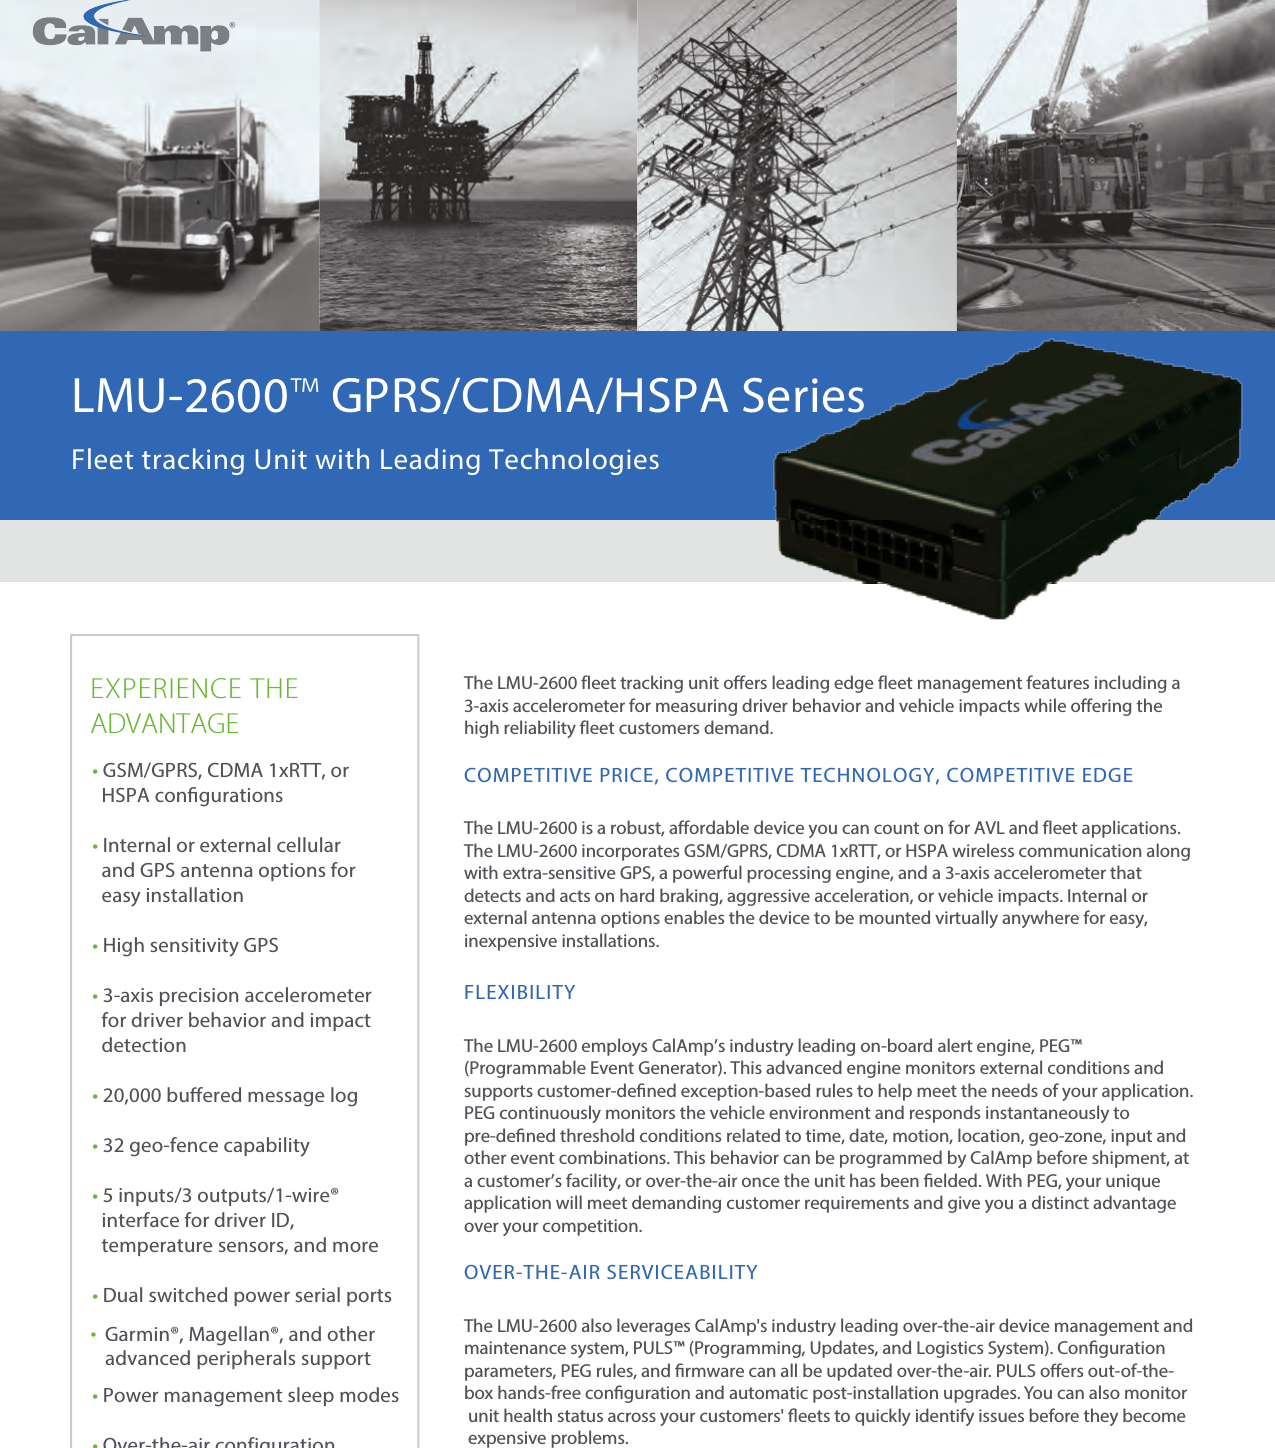 CalAmp Corp.   l   www.calamp.com 1EXPERIENCE THEADVANTAGEThe LMU-2600 fleet tracking unit offers leading edge fleet management features including a 3-axis accelerometer for measuring driver behavior and vehicle impacts while offering the high reliability fleet customers demand.COMPETITIVE PRICE, COMPETITIVE TECHNOLOGY, COMPETITIVE EDGEThe LMU-2600 is a robust, affordable device you can count on for AVL and fleet applications. The LMU-2600 incorporates GSM/GPRS, CDMA 1xRTT, or HSPA wireless communication along with extra-sensitive GPS, a powerful processing engine, and a 3-axis accelerometer that detects and acts on hard braking, aggressive acceleration, or vehicle impacts. Internal or external antenna options enables the device to be mounted virtually anywhere for easy, inexpensive installations.FLEXIBILITYThe LMU-2600 employs CalAmp’s industry leading on-board alert engine, PEG™ (Programmable Event Generator). This advanced engine monitors external conditions and supports customer-dened exception-based rules to help meet the needs of your application. PEG continuously monitors the vehicle environment and responds instantaneously to pre-dened threshold conditions related to time, date, motion, location, geo-zone, input and other event combinations. This behavior can be programmed by CalAmp before shipment, at a customer’s facility, or over-the-air once the unit has been elded. With PEG, your unique application will meet demanding customer requirements and give you a distinct advantage over your competition.OVER-THE-AIR SERVICEABILITYThe LMU-2600 also leverages CalAmp&apos;s industry leading over-the-air device management and maintenance system, PULS™ (Programming, Updates, and Logistics System). Conguration parameters, PEG rules, and rmware can all be updated over-the-air. PULS oers out-of-the-box hands-free conguration and automatic post-installation upgrades. You can also monitor  unit health status across your customers&apos; eets to quickly identify issues before they become expensive problems.•GSM/GPRS, CDMA 1xRTT, orHSPA congurations•Internal or external cellularand GPS antenna options foreasy installation•High sensitivity GPS•3-axis precision accelerometerfor driver behavior and impactdetection•20,000 buered message log•32 geo-fence capability•5 inputs/3 outputs/1-wire®interface for driver ID,temperature sensors, and more•Dual switched power serial ports•Garmin®, Magellan®, and otheradvanced peripherals support•Power management sleep modes•Over-the-air configuration and firmware downloadLMU-2600™ GPRS/CDMA/HSPA SeriesFleet tracking Unit with Leading Technologies